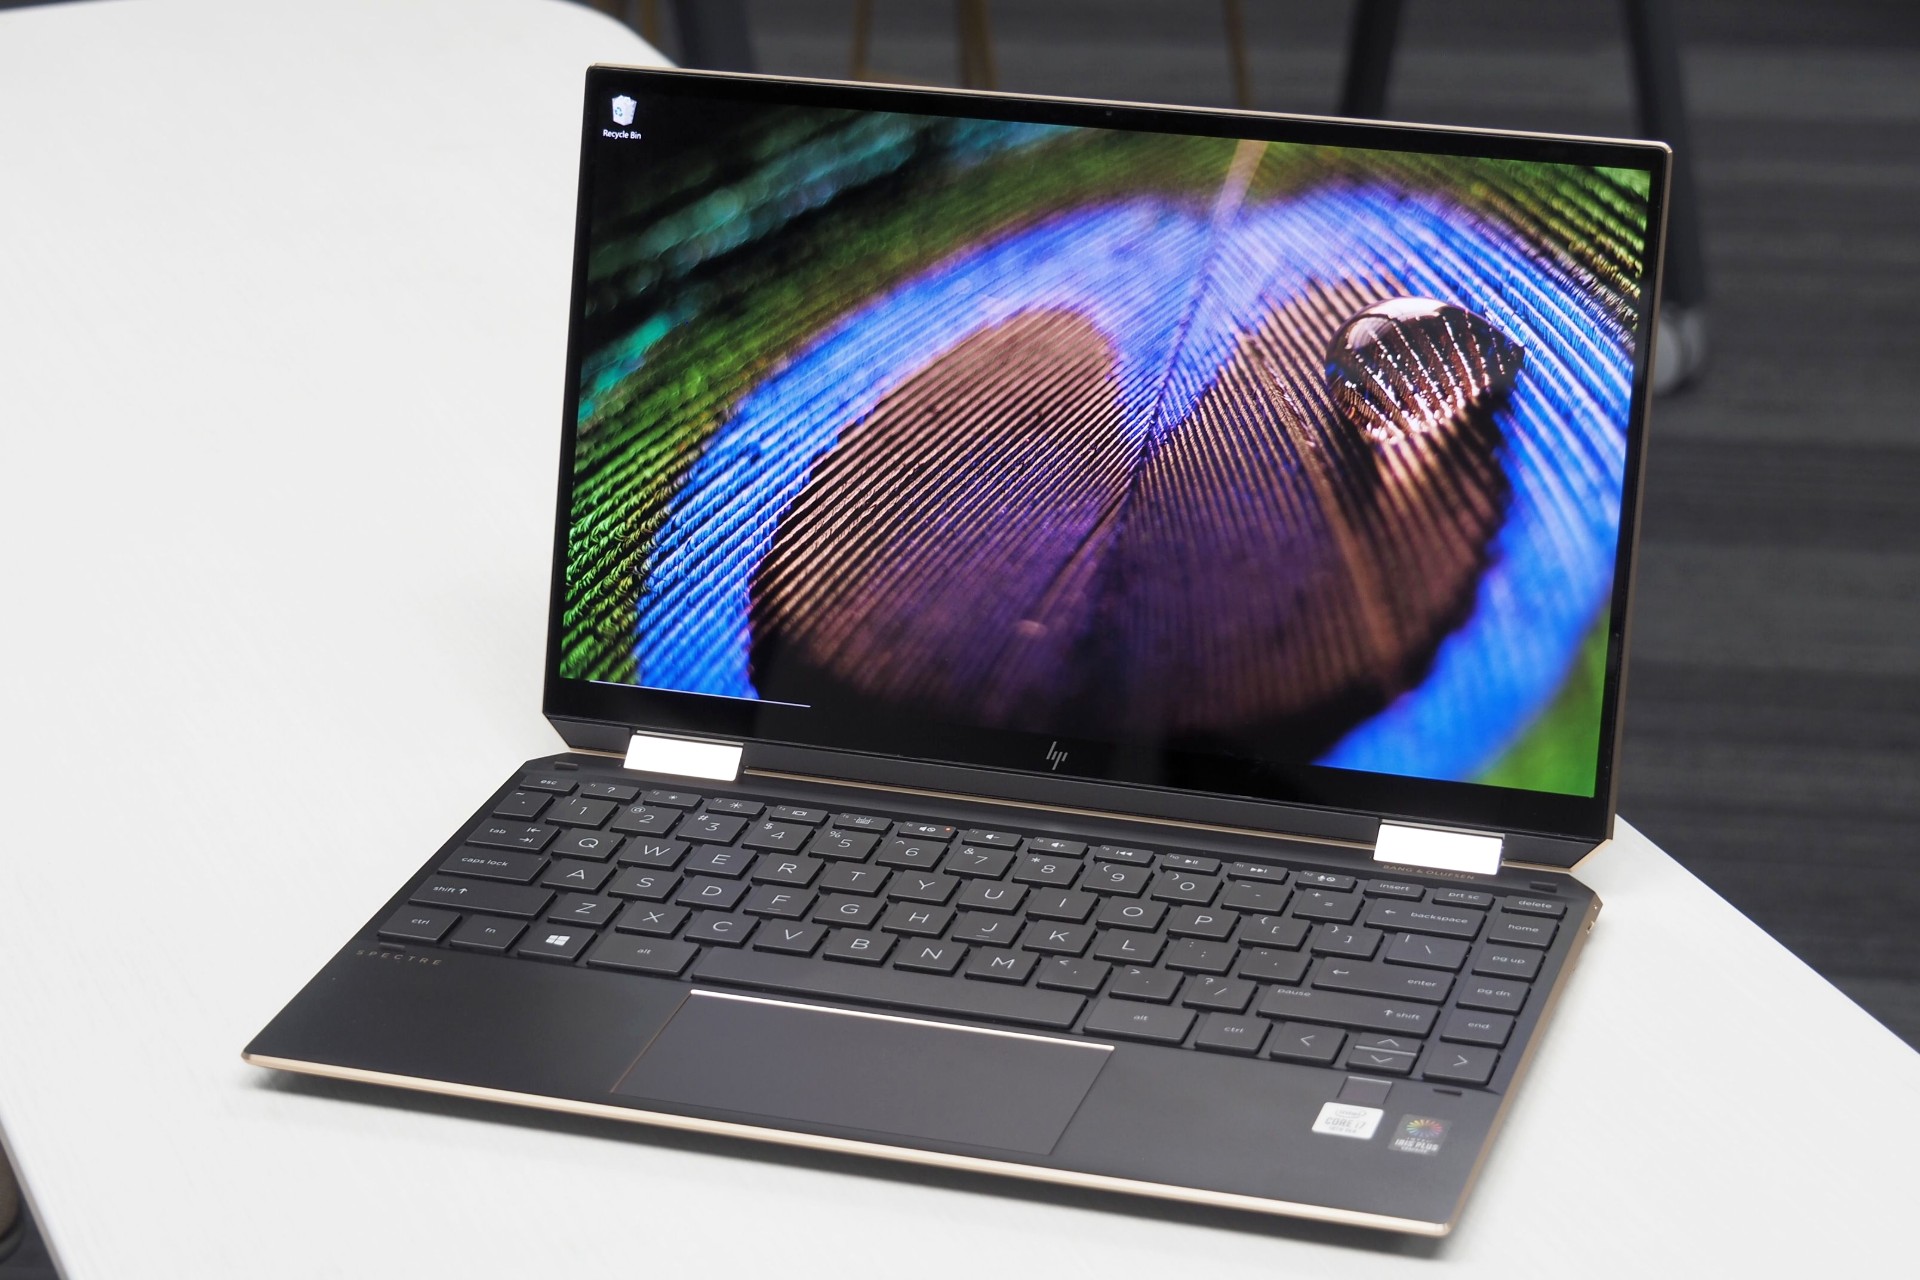 HP Spectre x360 13 2019 review: This laptop gets stupidly good battery life